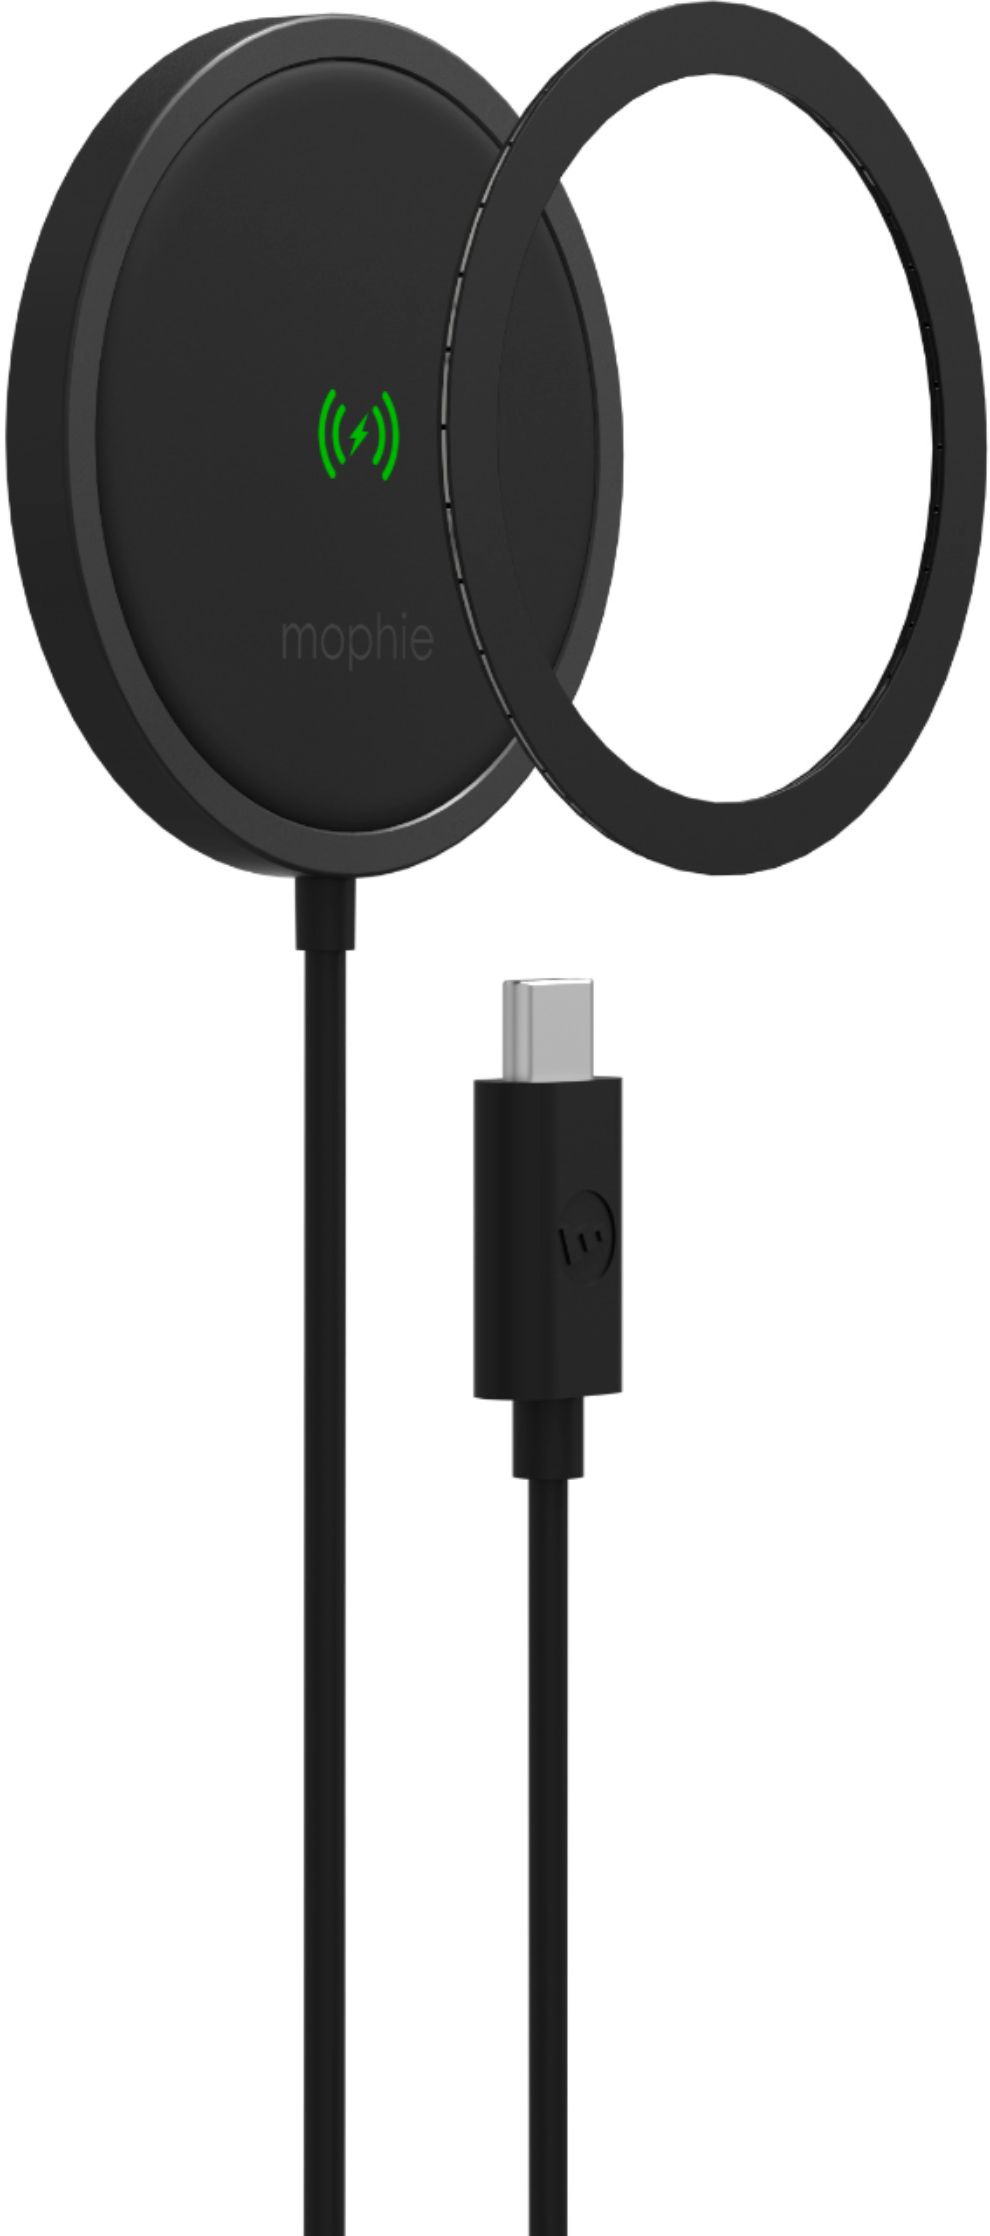 mophie snap+ wireless vent mount MagSafe car charger provides